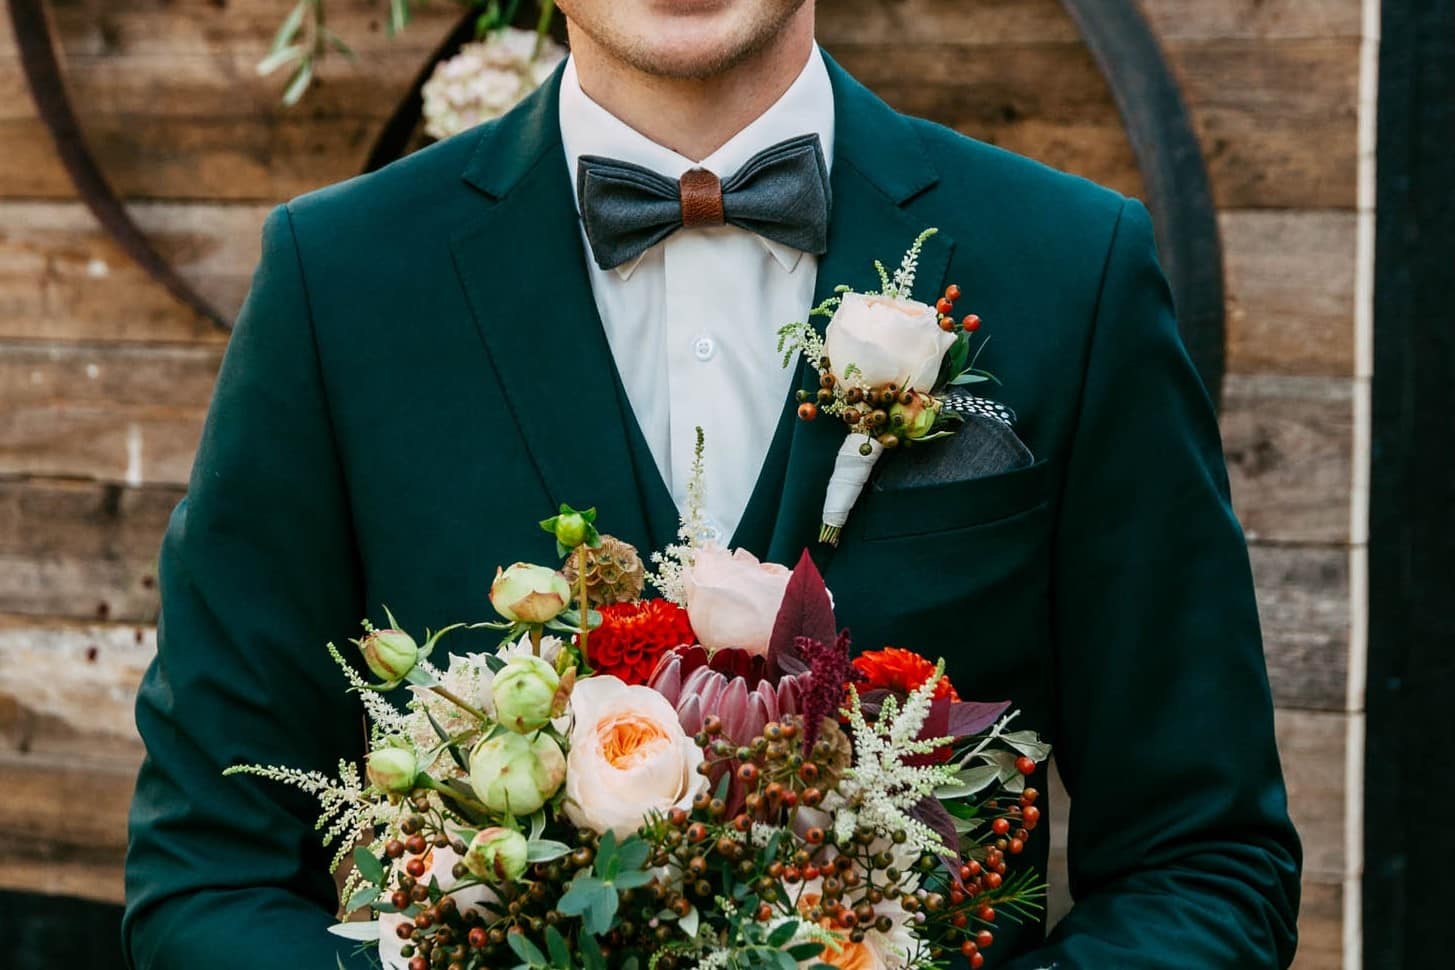 A groom in a green suit with a corsage bouquet.